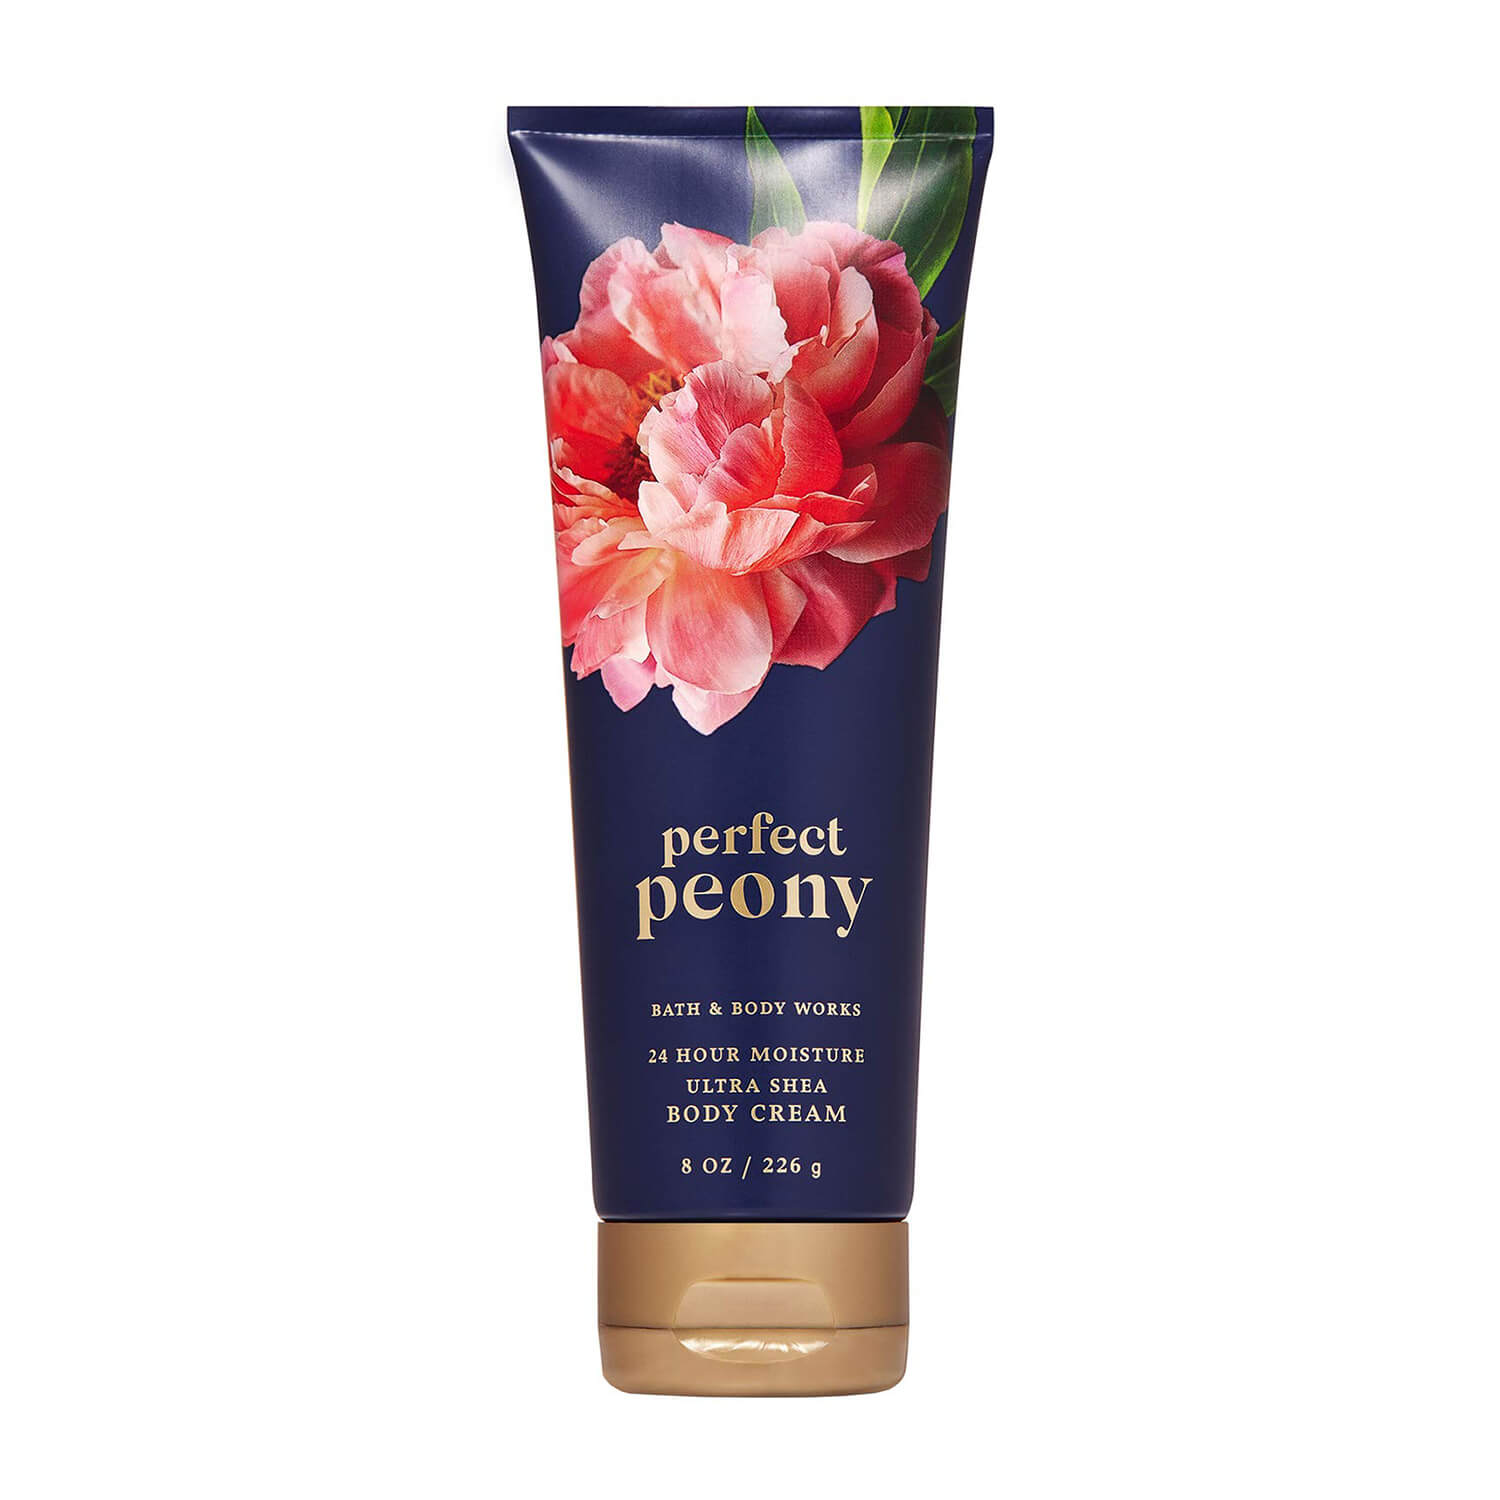 bath and body works body cream perfect peony available at heygirl.pk for delivery in karachi lahore islamabad pakistan